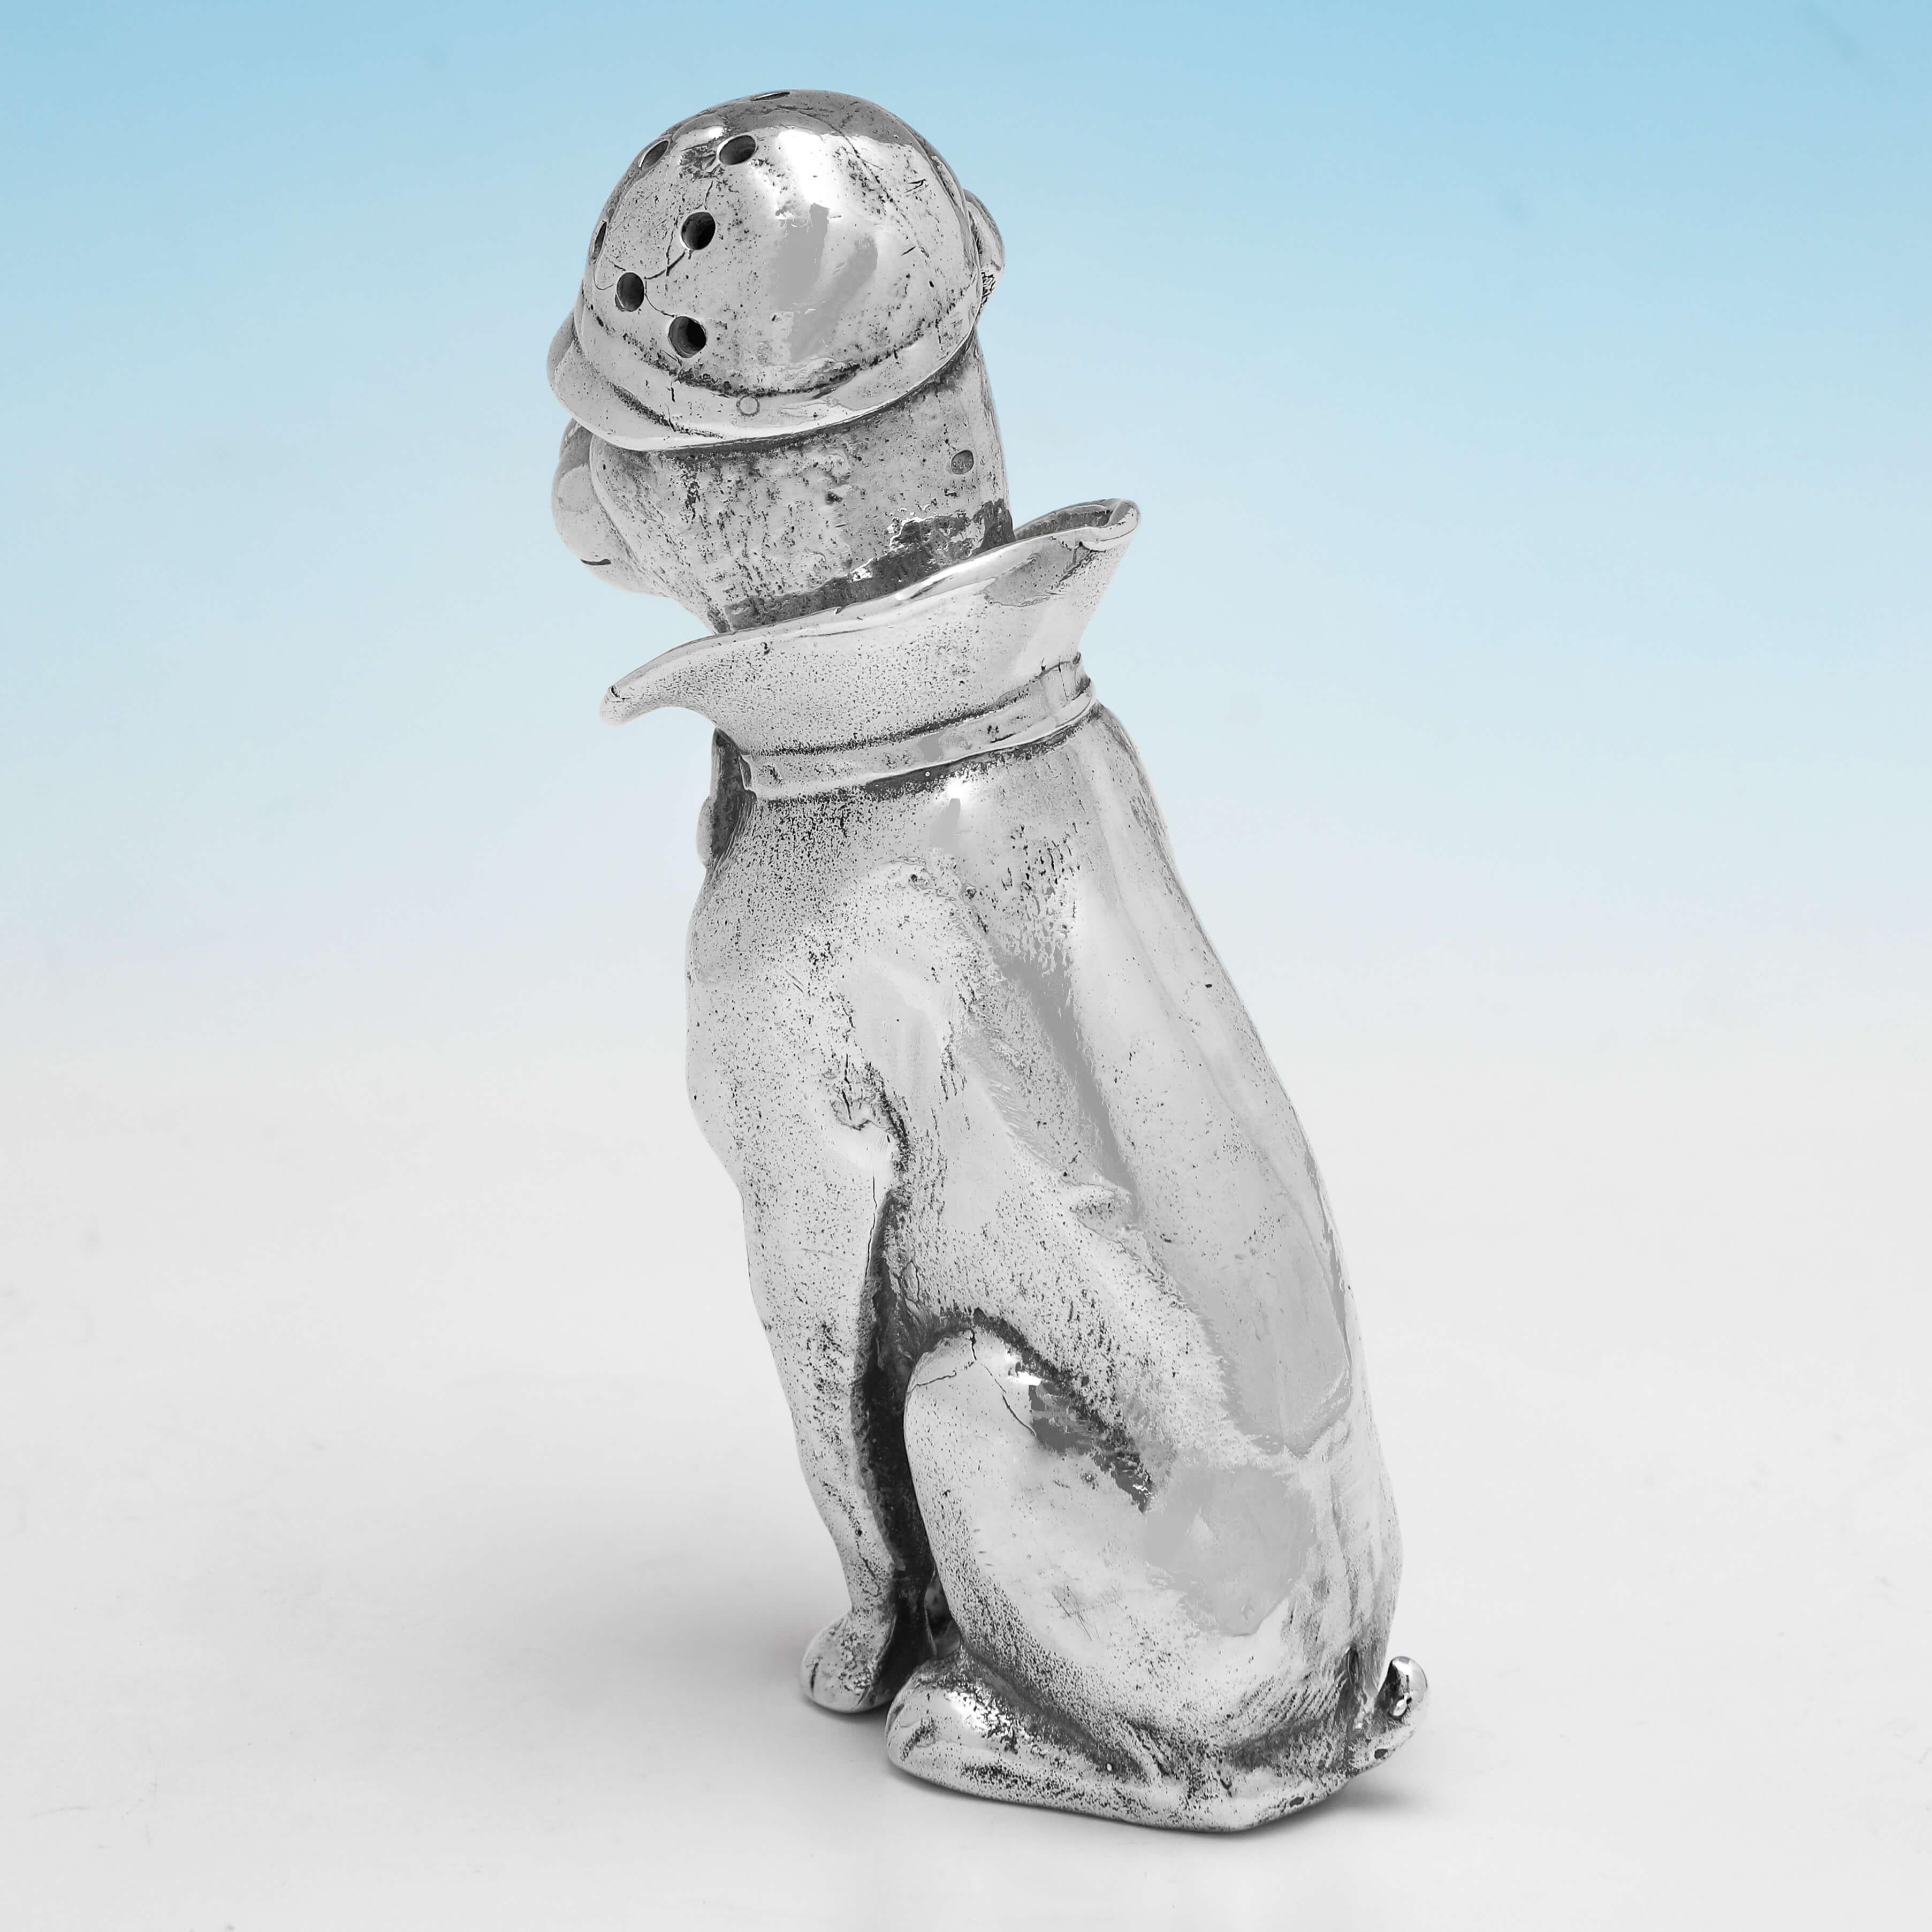 Hallmarked in London in 2000, this charming, sterling silver pepper pot, is fashioned as a dog wearing a hat and collar. The pepper pot measures 3.5